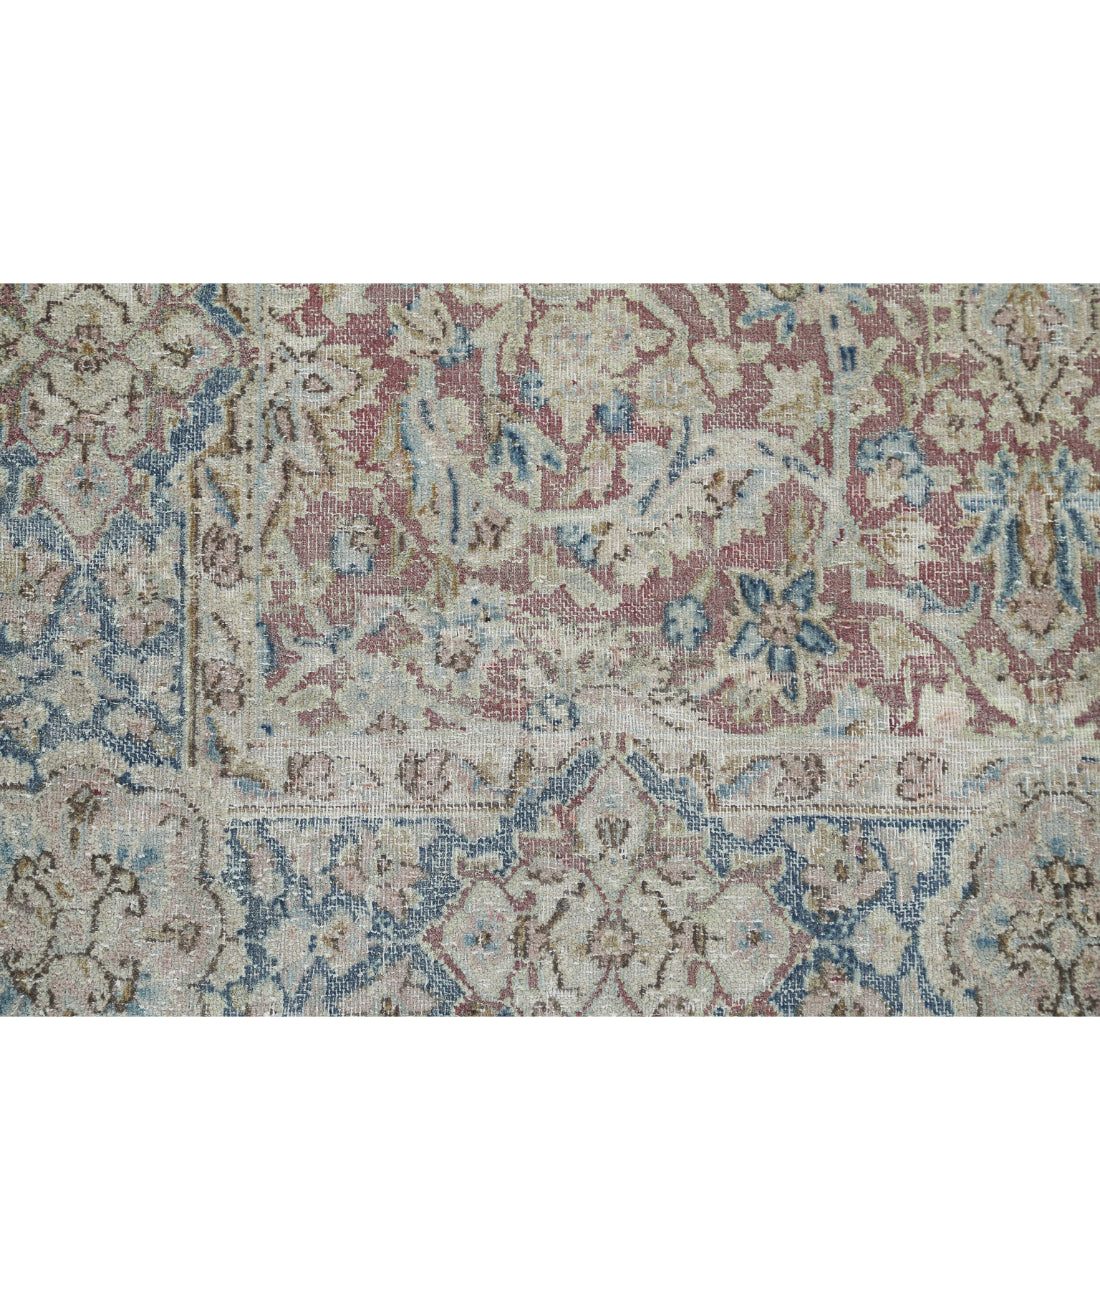 Hand Knotted Antique Persian Kerman Wool Rug - 3'8'' x 9'6'' 3'8'' x 9'6'' (110 X 285) / Pink / Blue